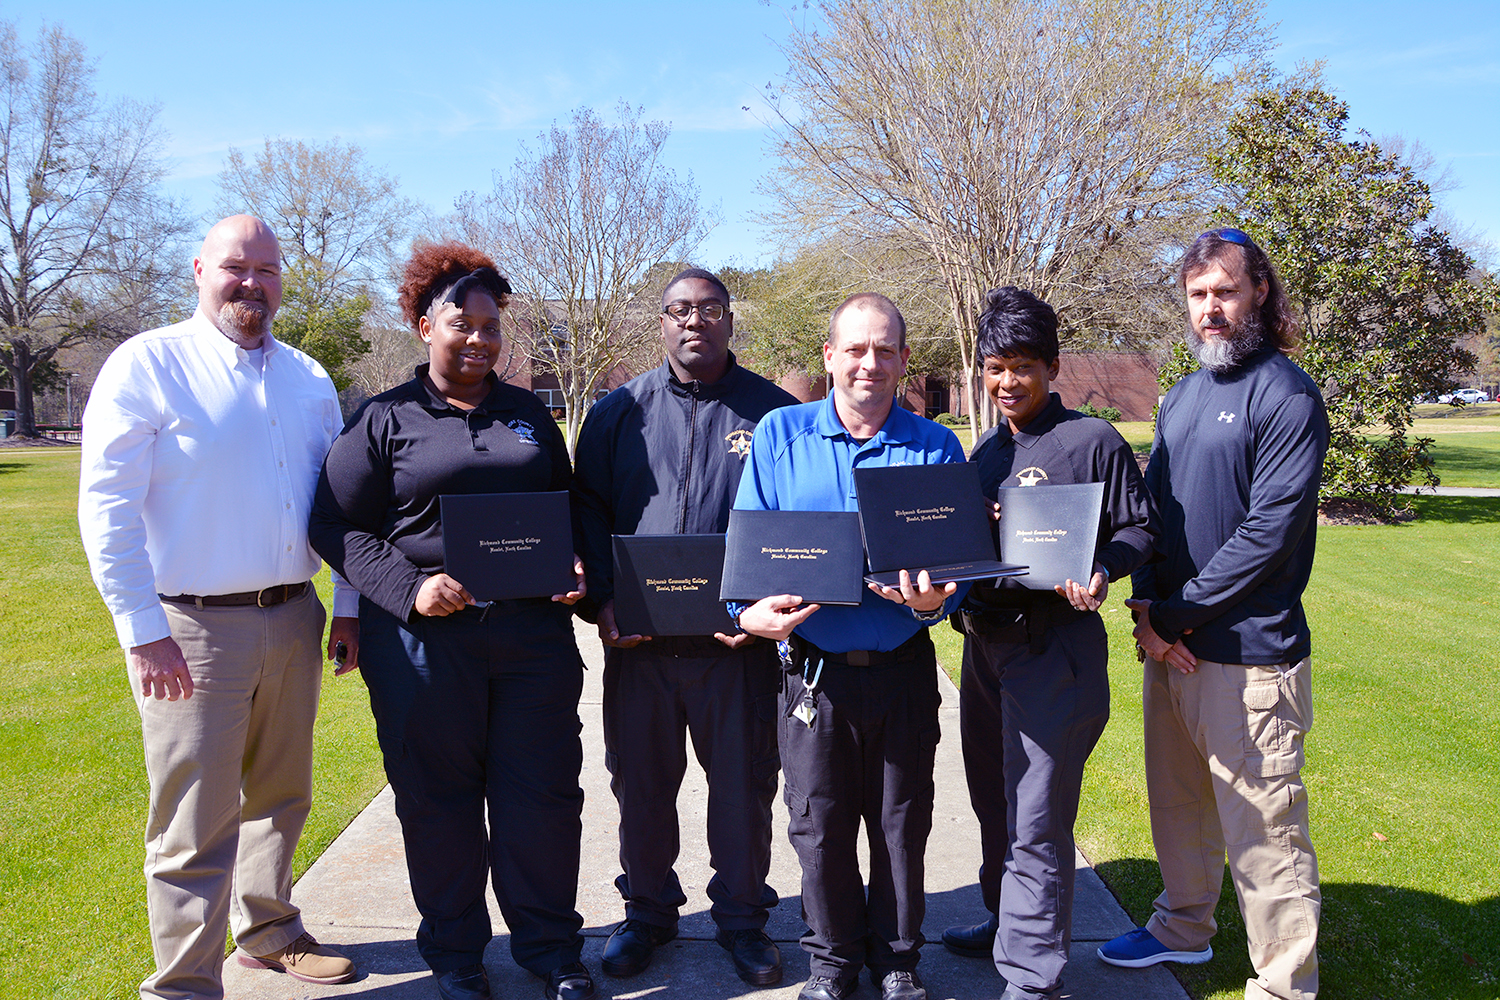 Students completing the Detention Officer Certification course stand in a group for a photo.